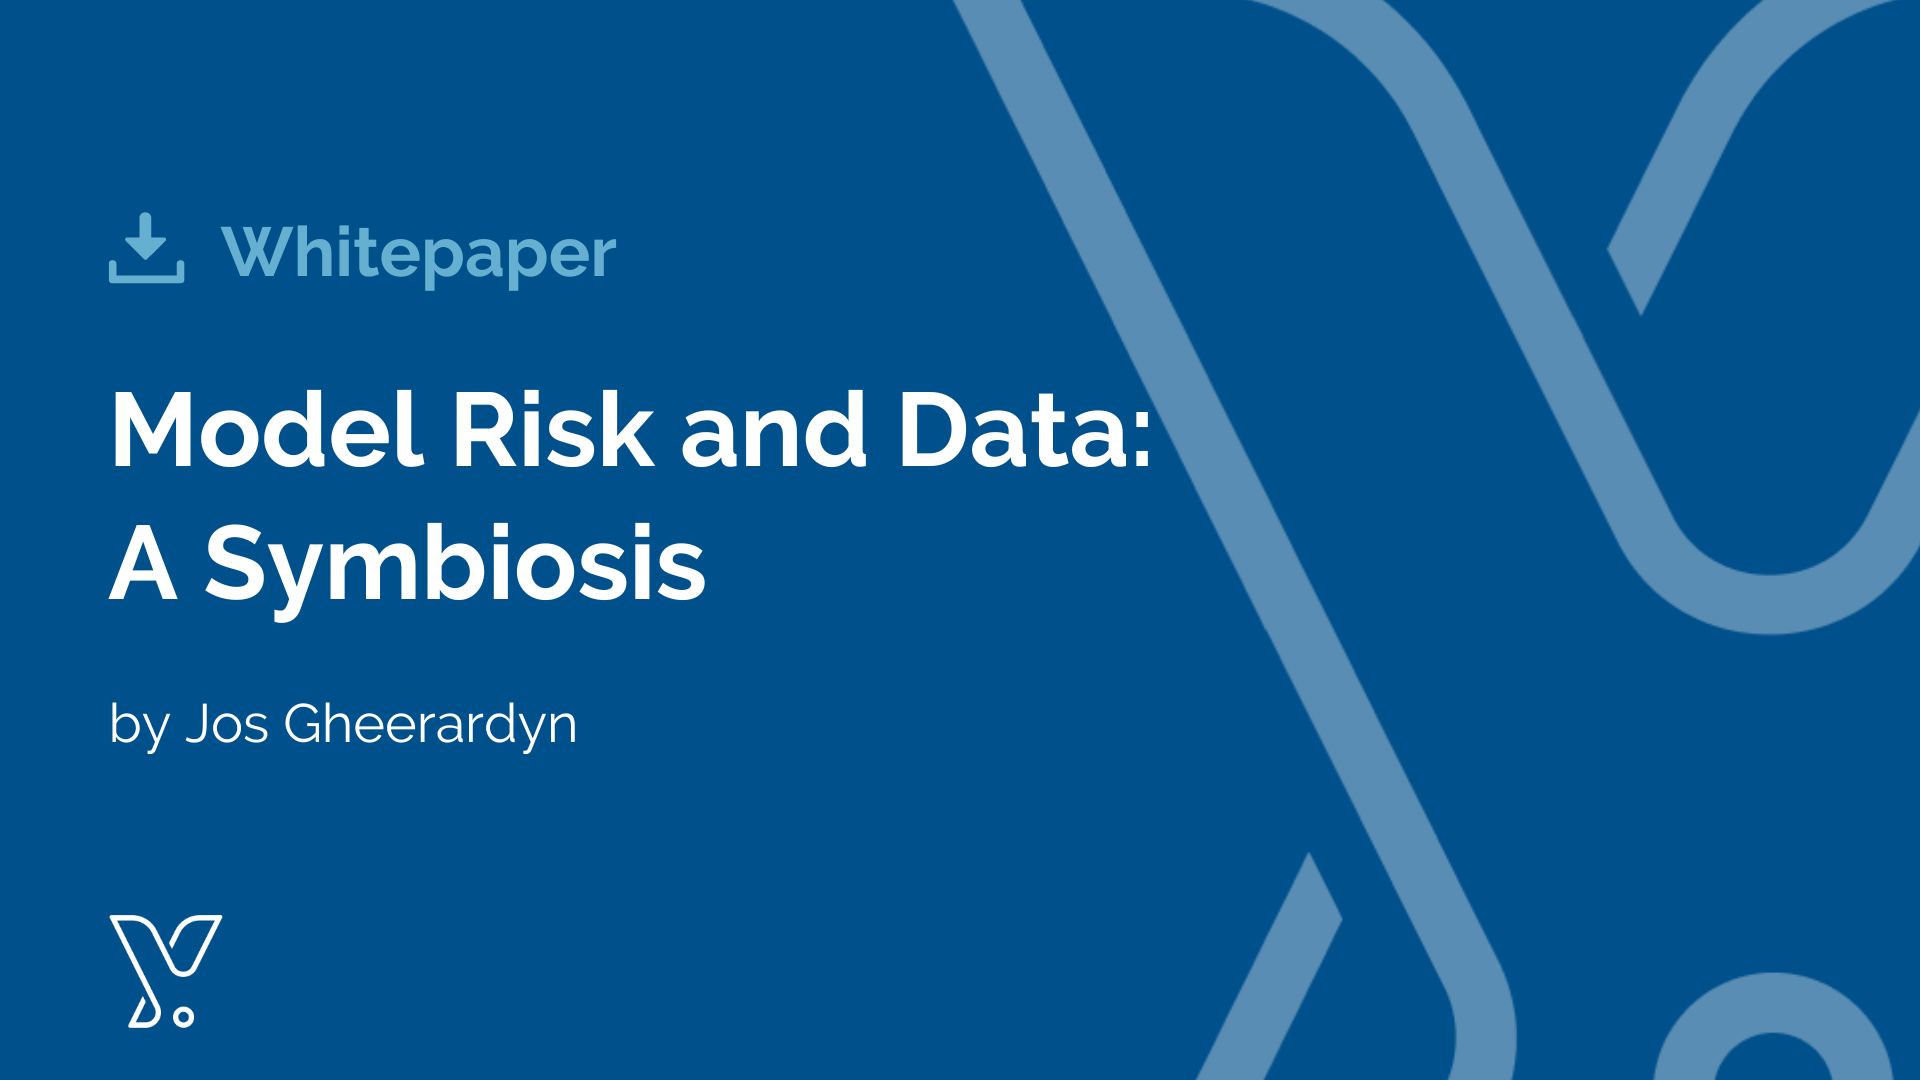 Model Risk and Data – A Symbiosis